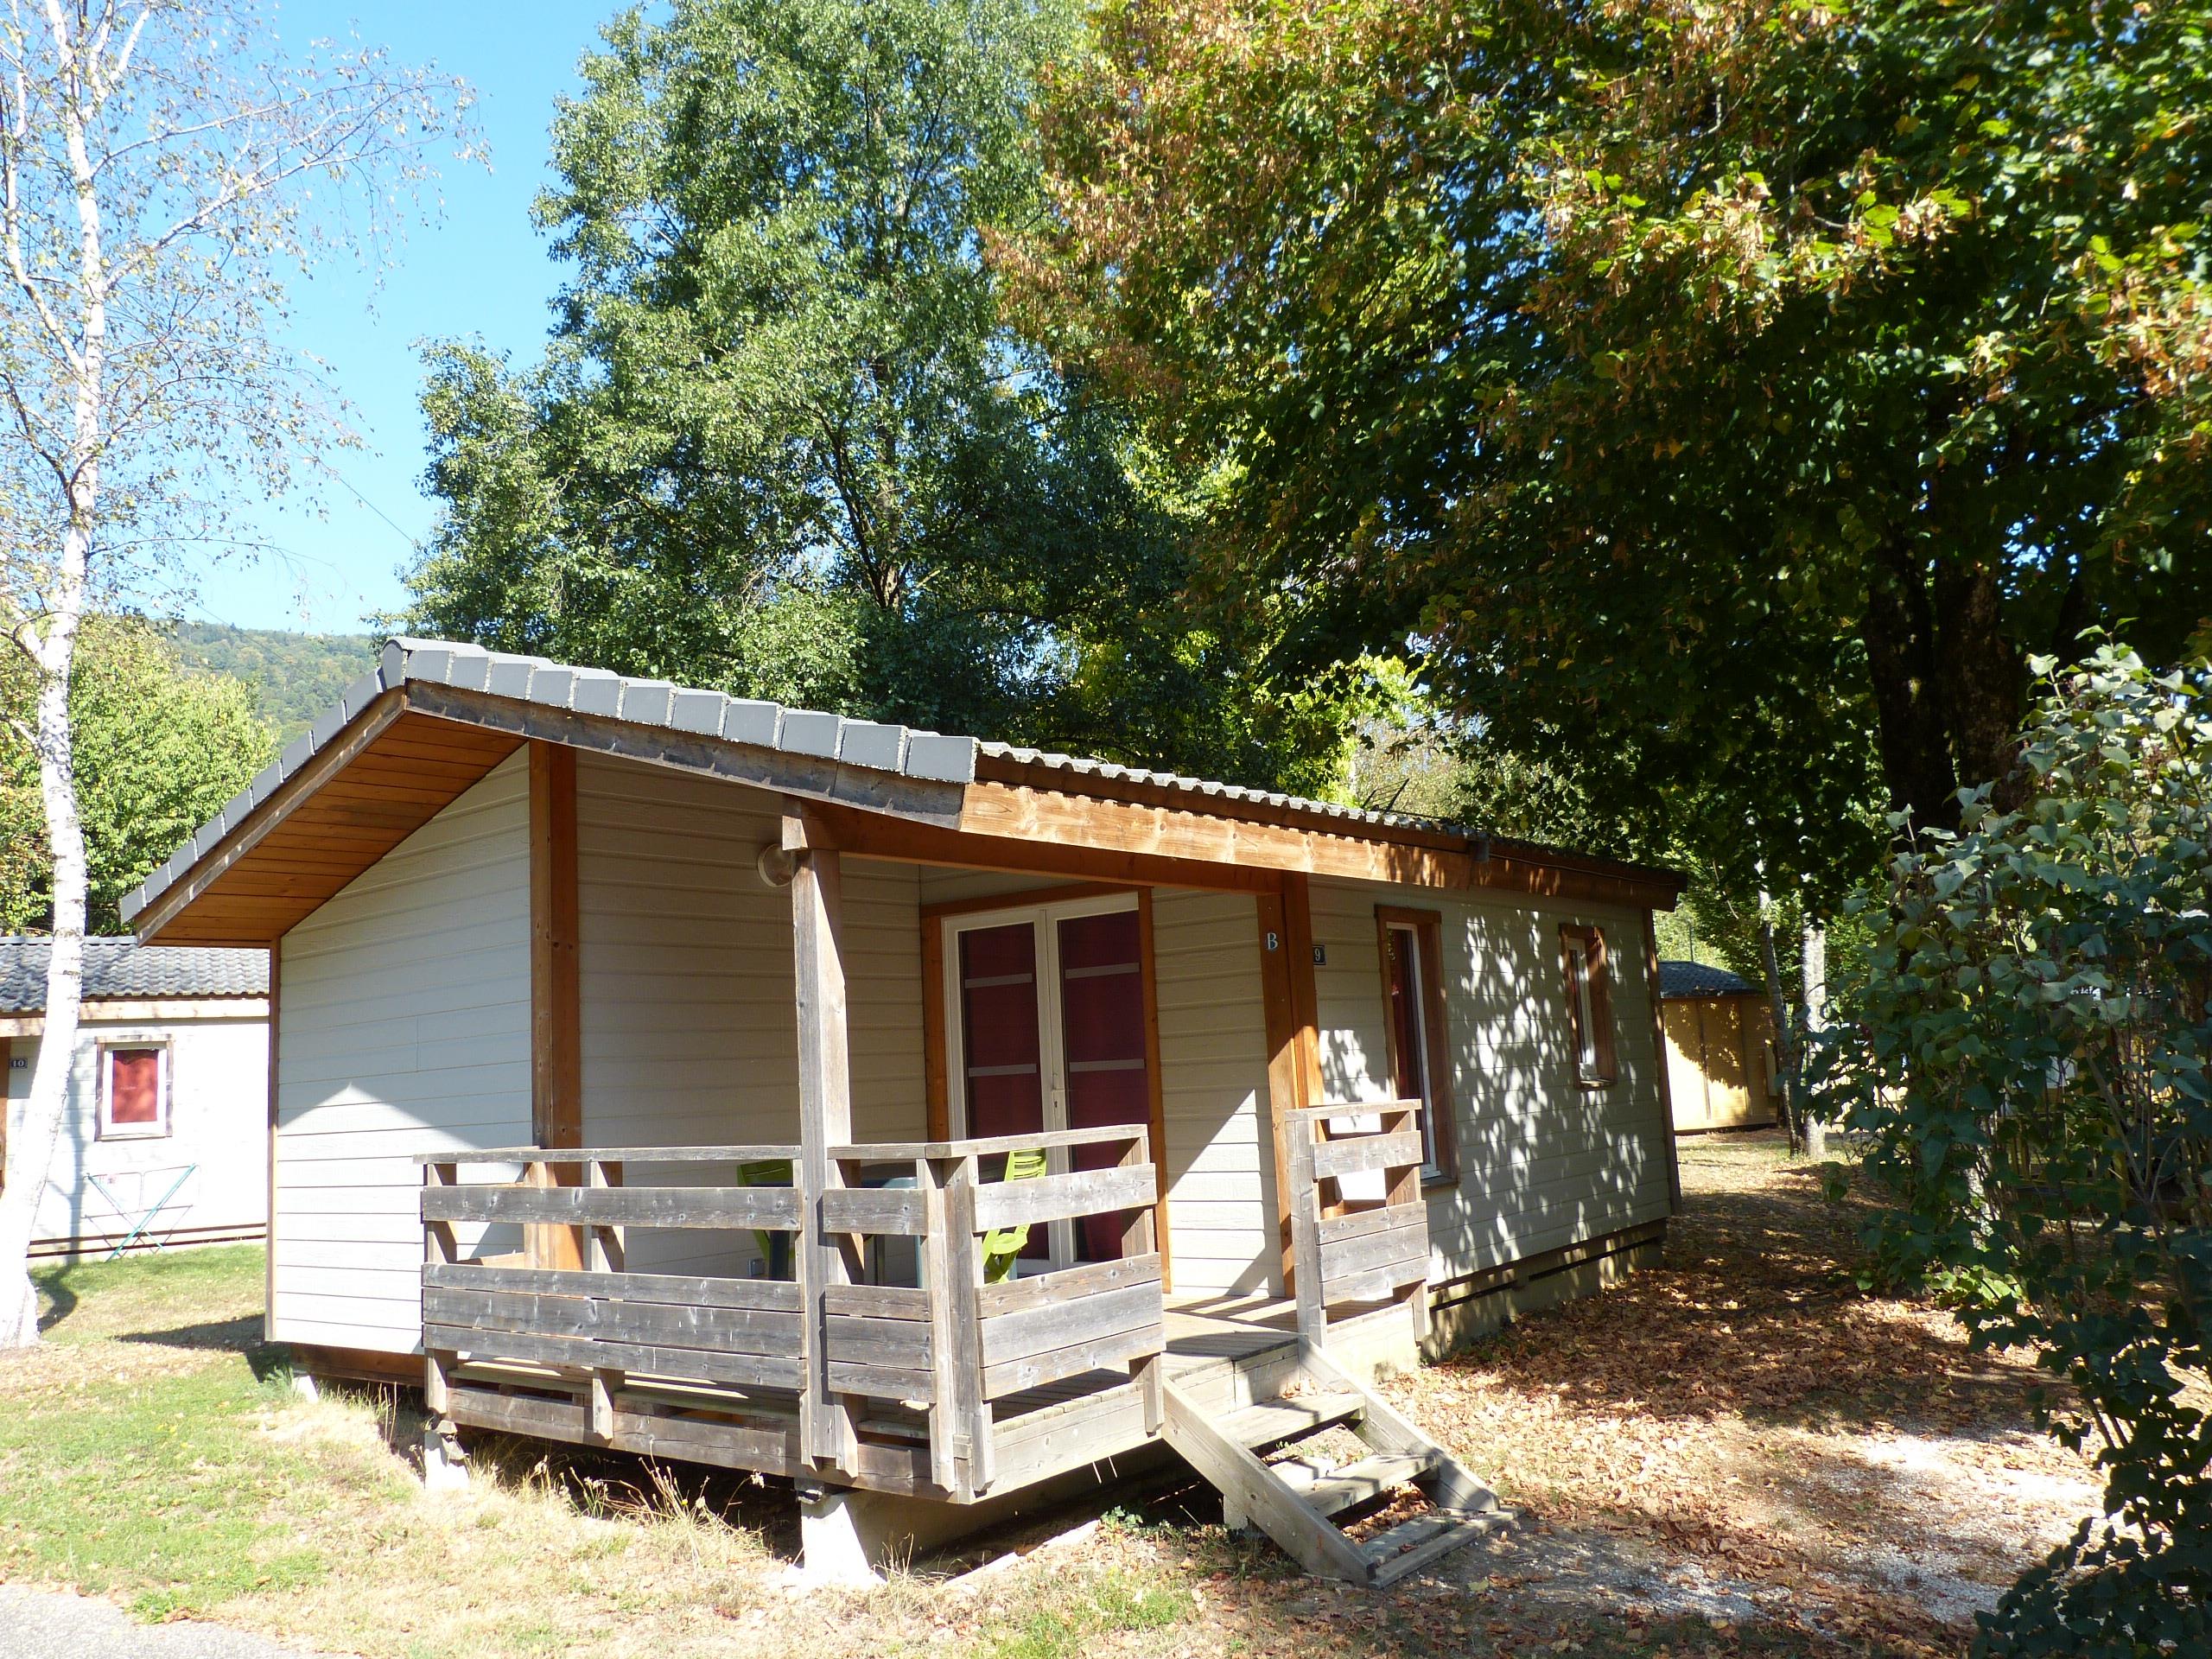 Huuraccommodatie - Chalet 31 M² - 6 Pers. - Camping Le Lac Saint Clair